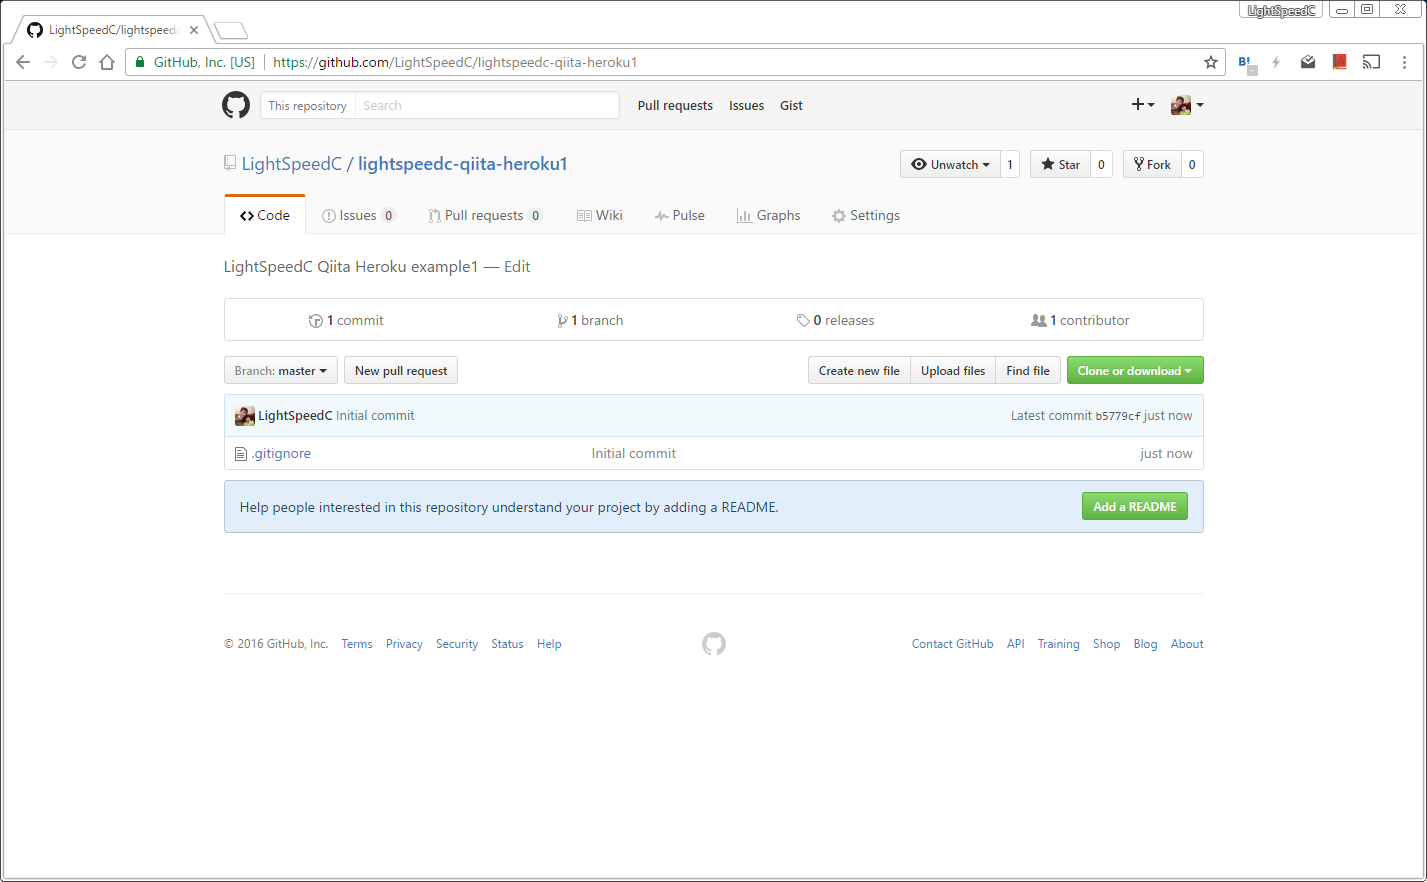 github002-repository-created.png